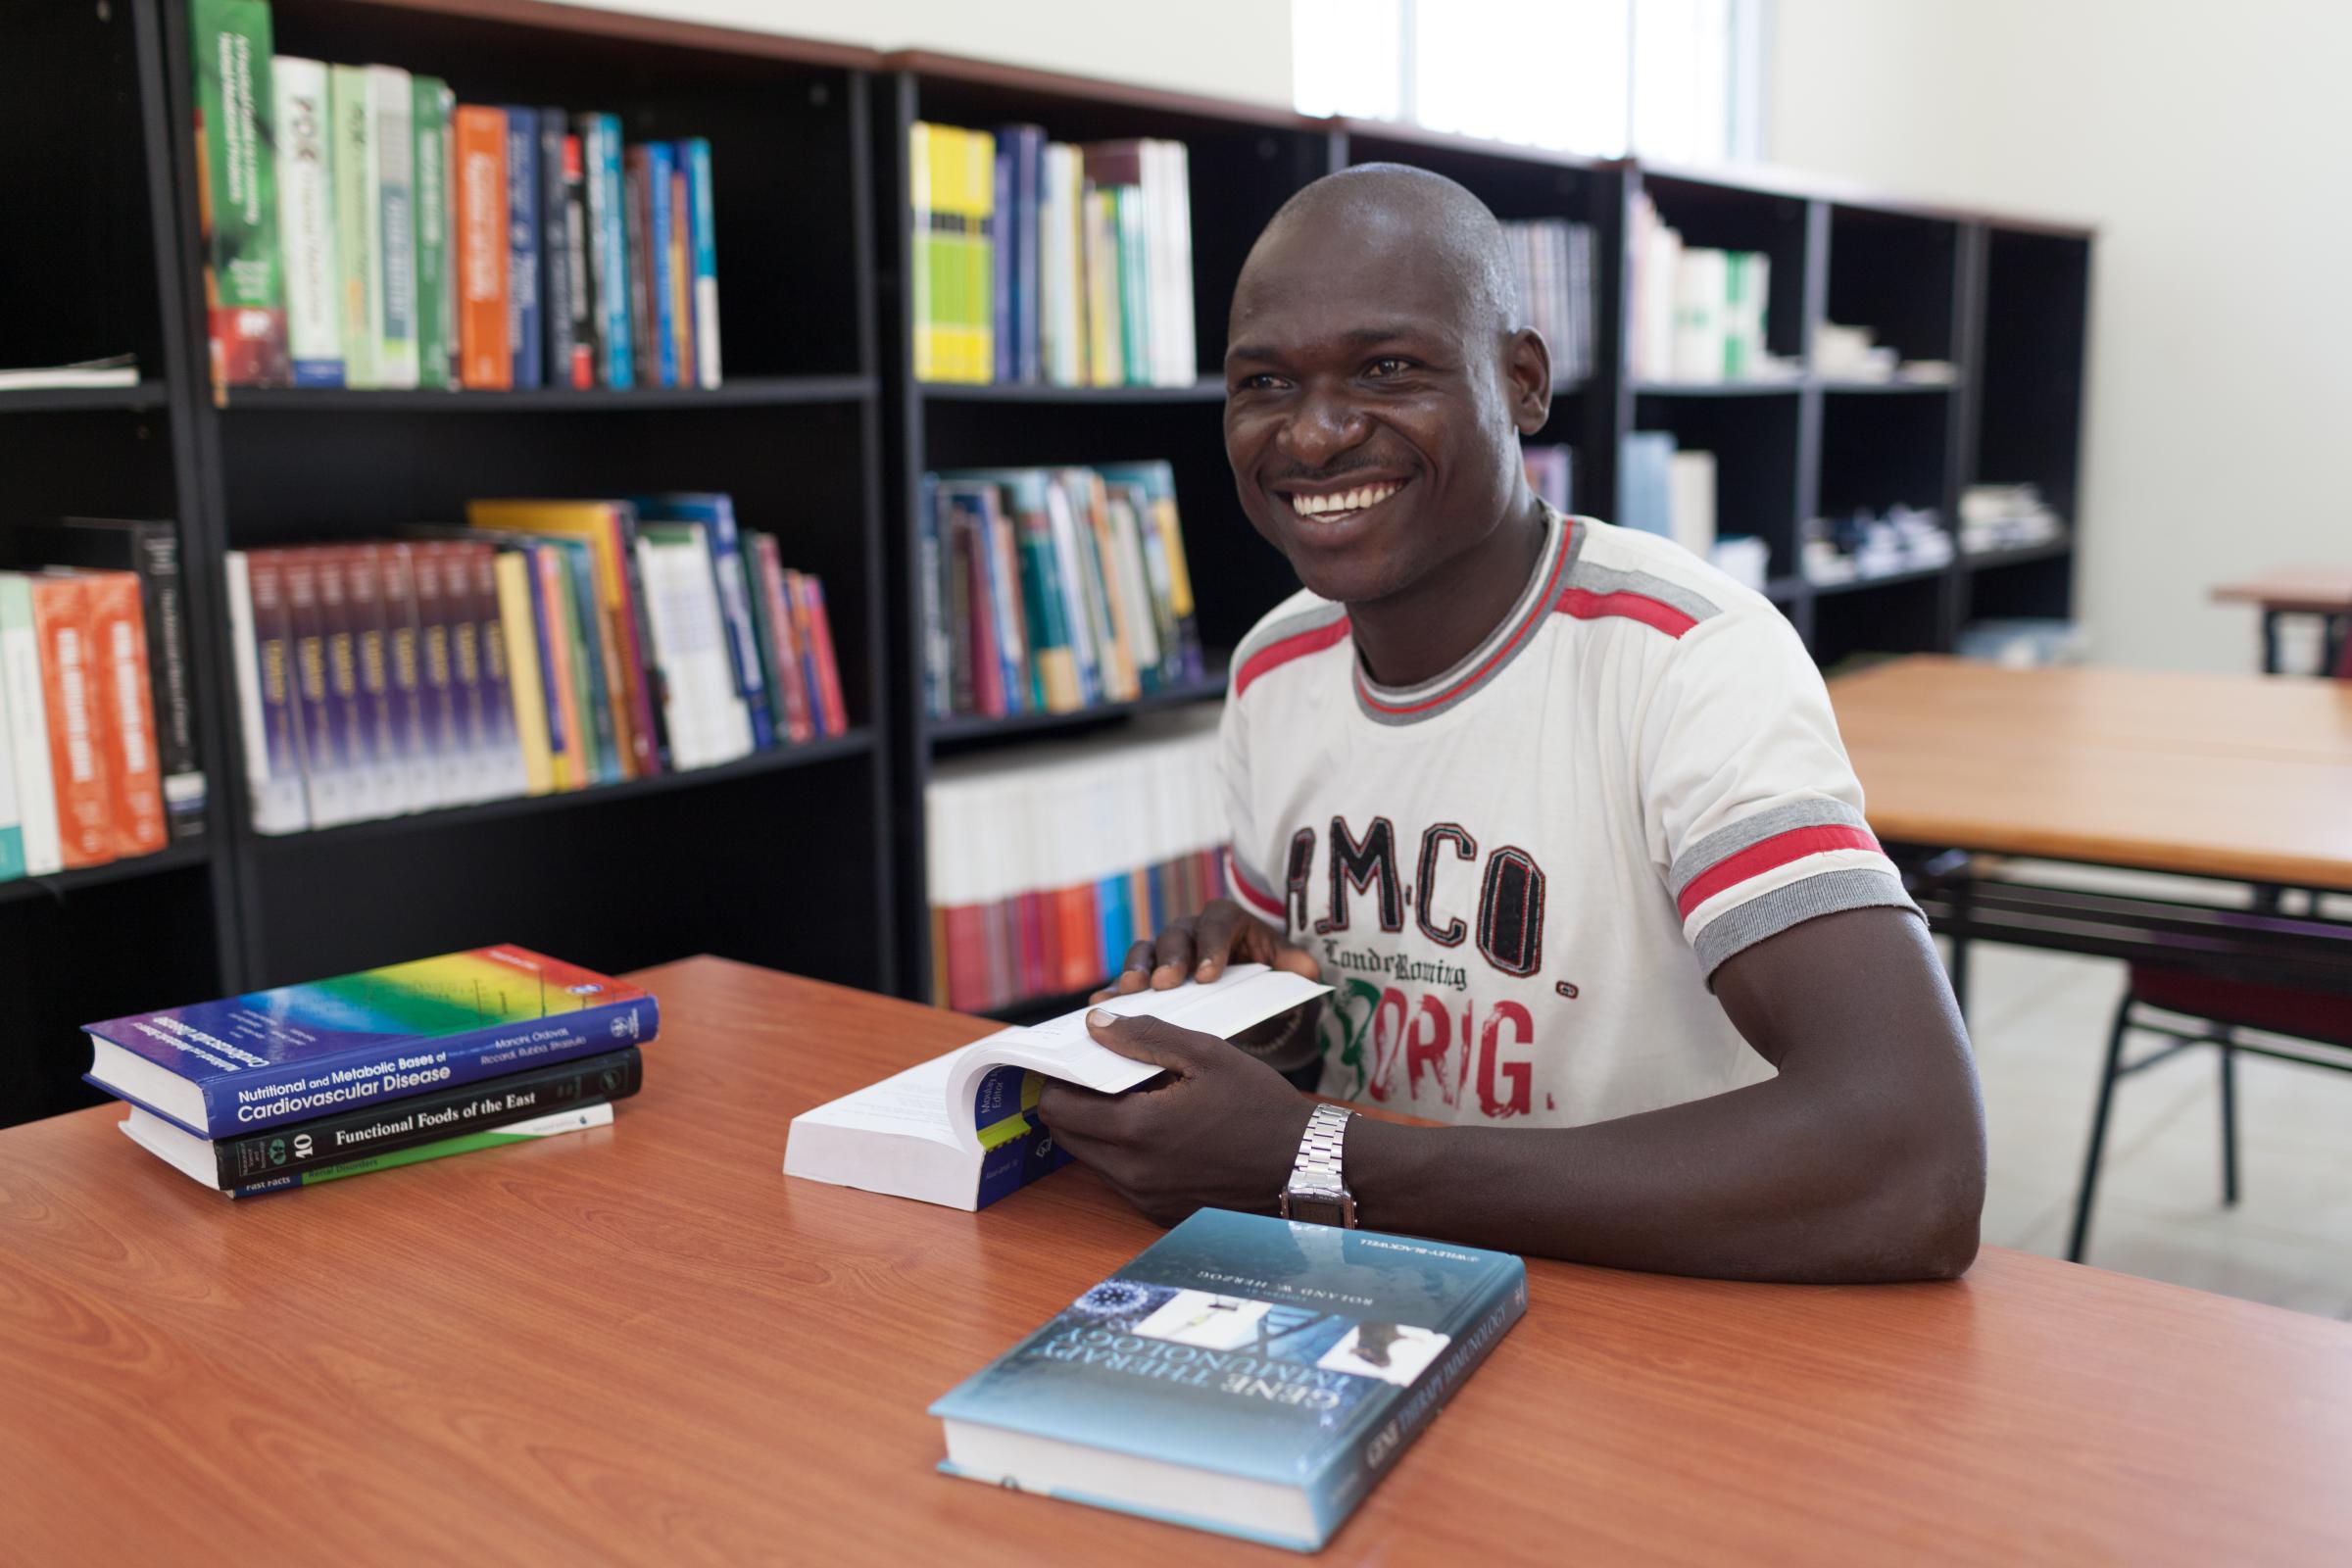 MIDWIVES: BRINGING HEALTH SERVICES CLOSER TO THE PEOPLE - Medicine student Ocan Walter, at the library of the College of Physicians and Surgeons in Juba...